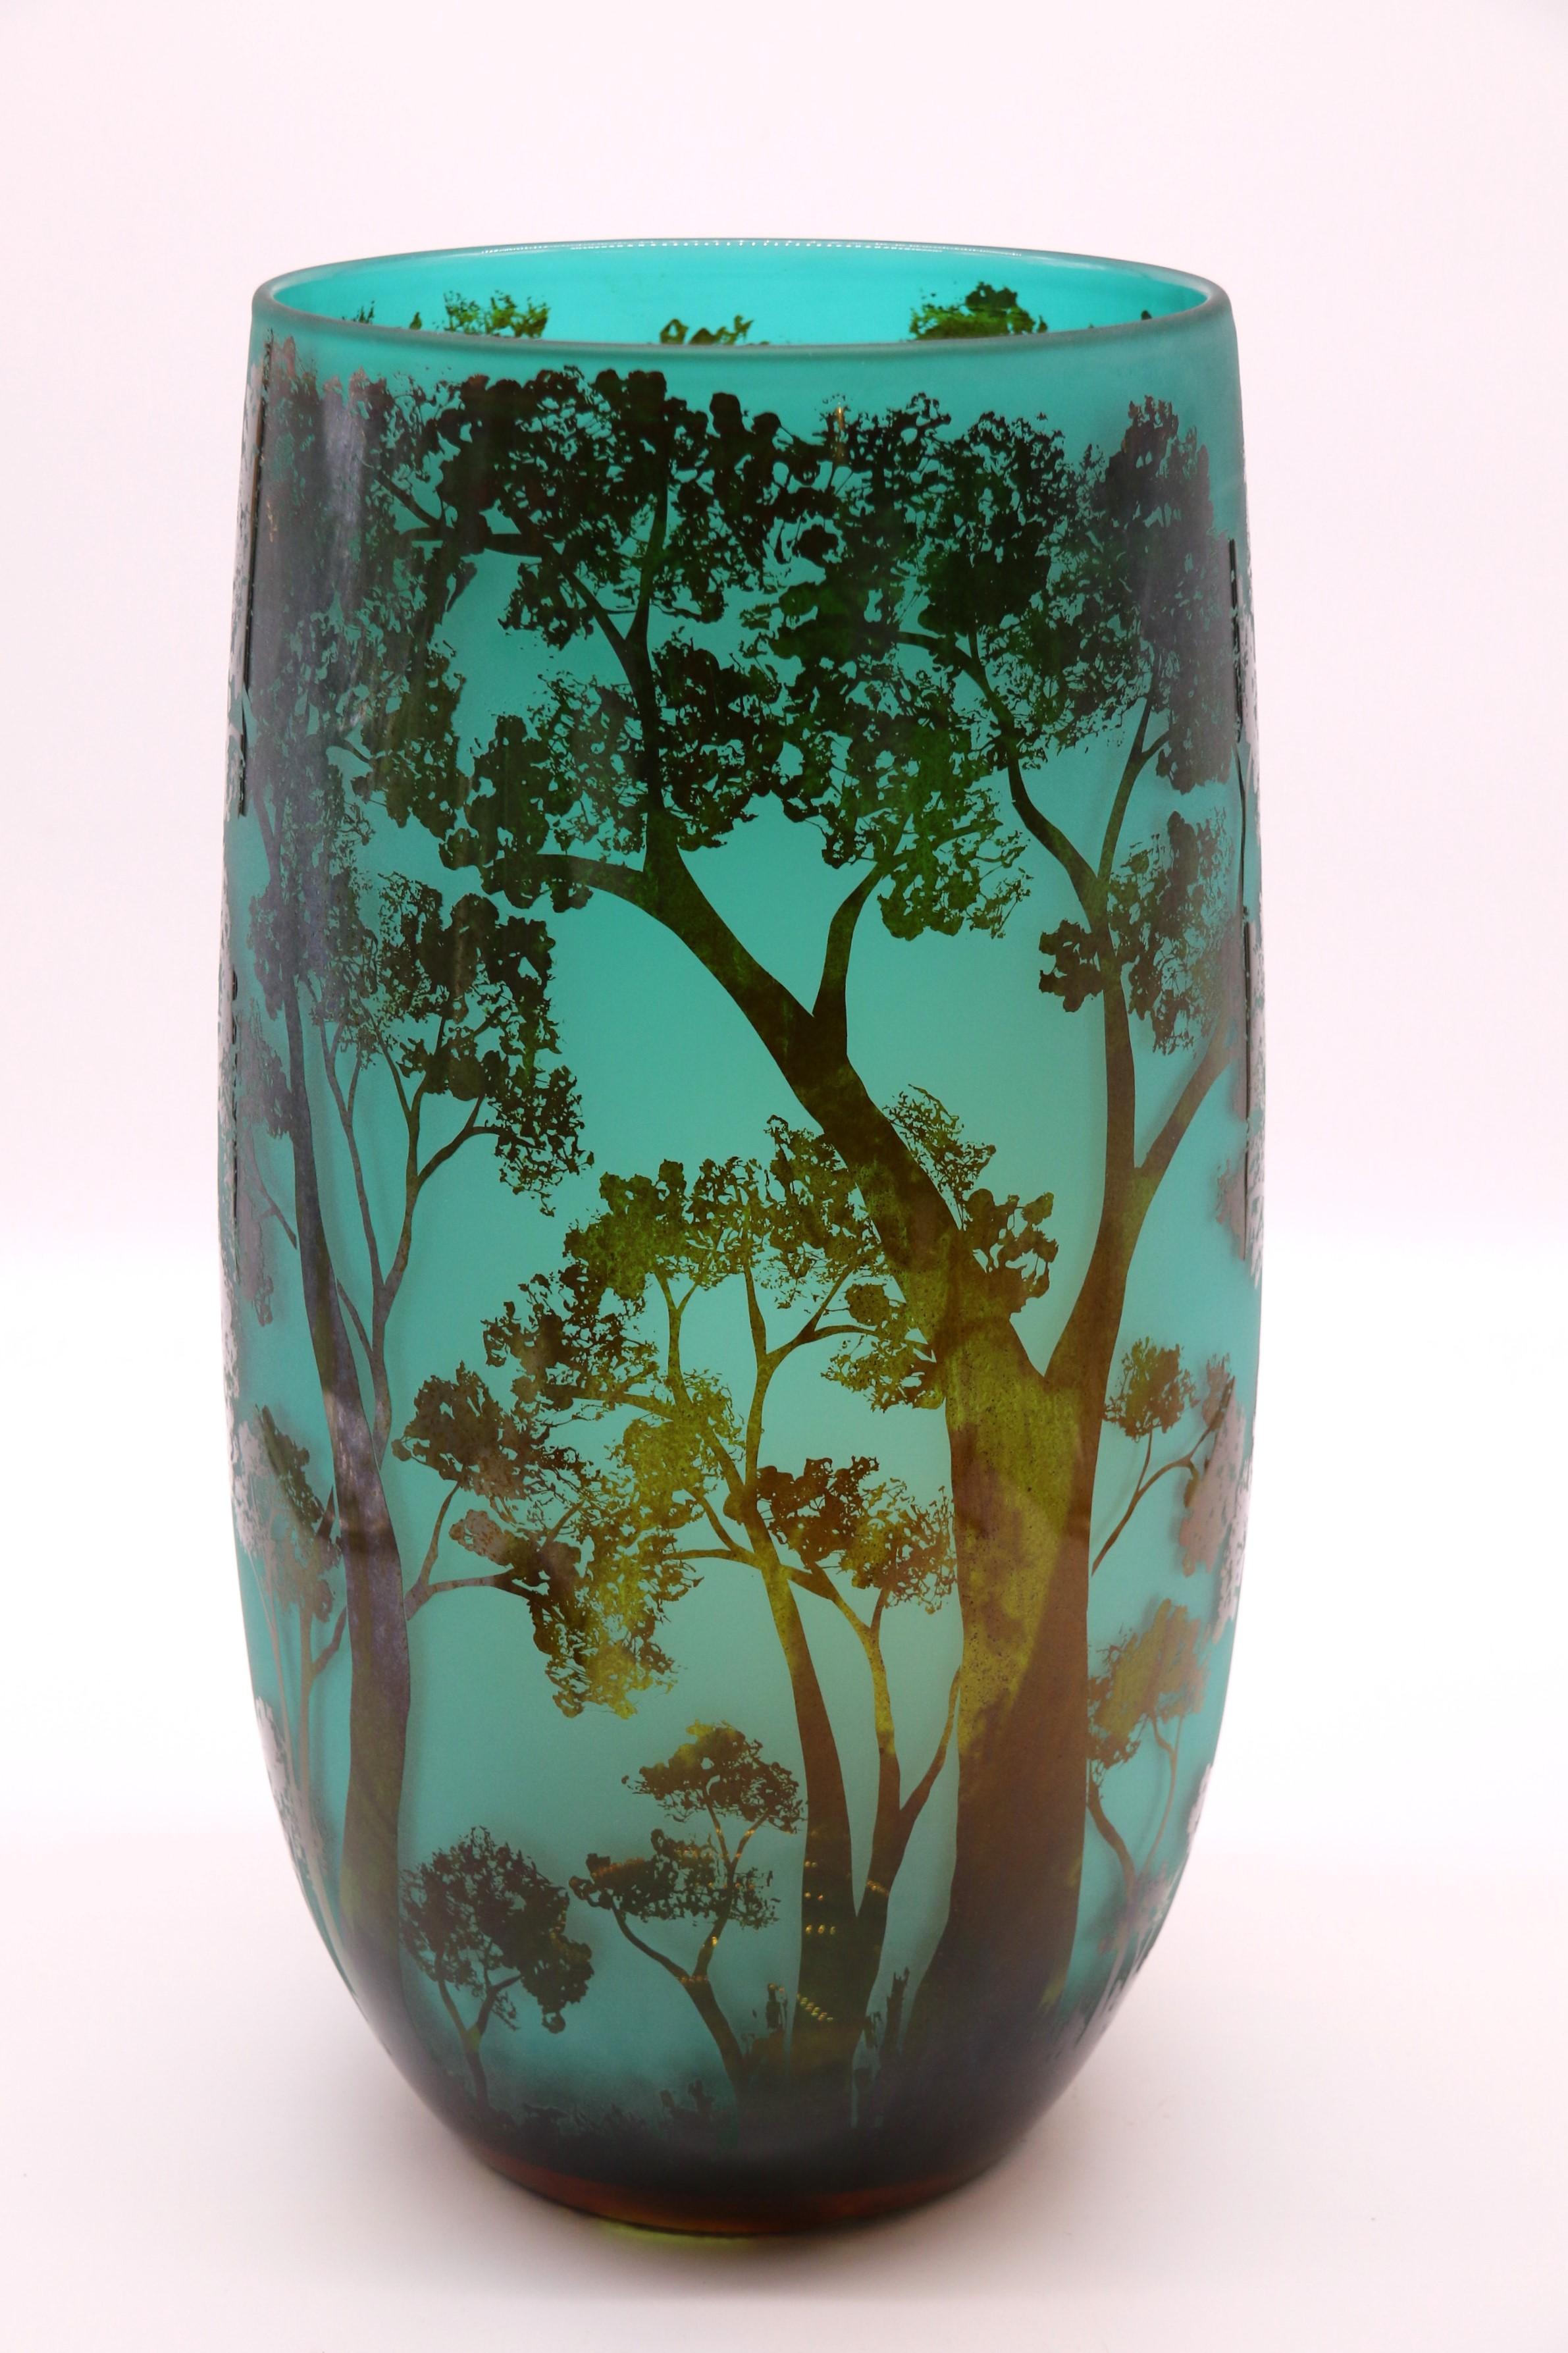 Etched A large 20th century cameo glass vase decorated with an intricate woodland scene